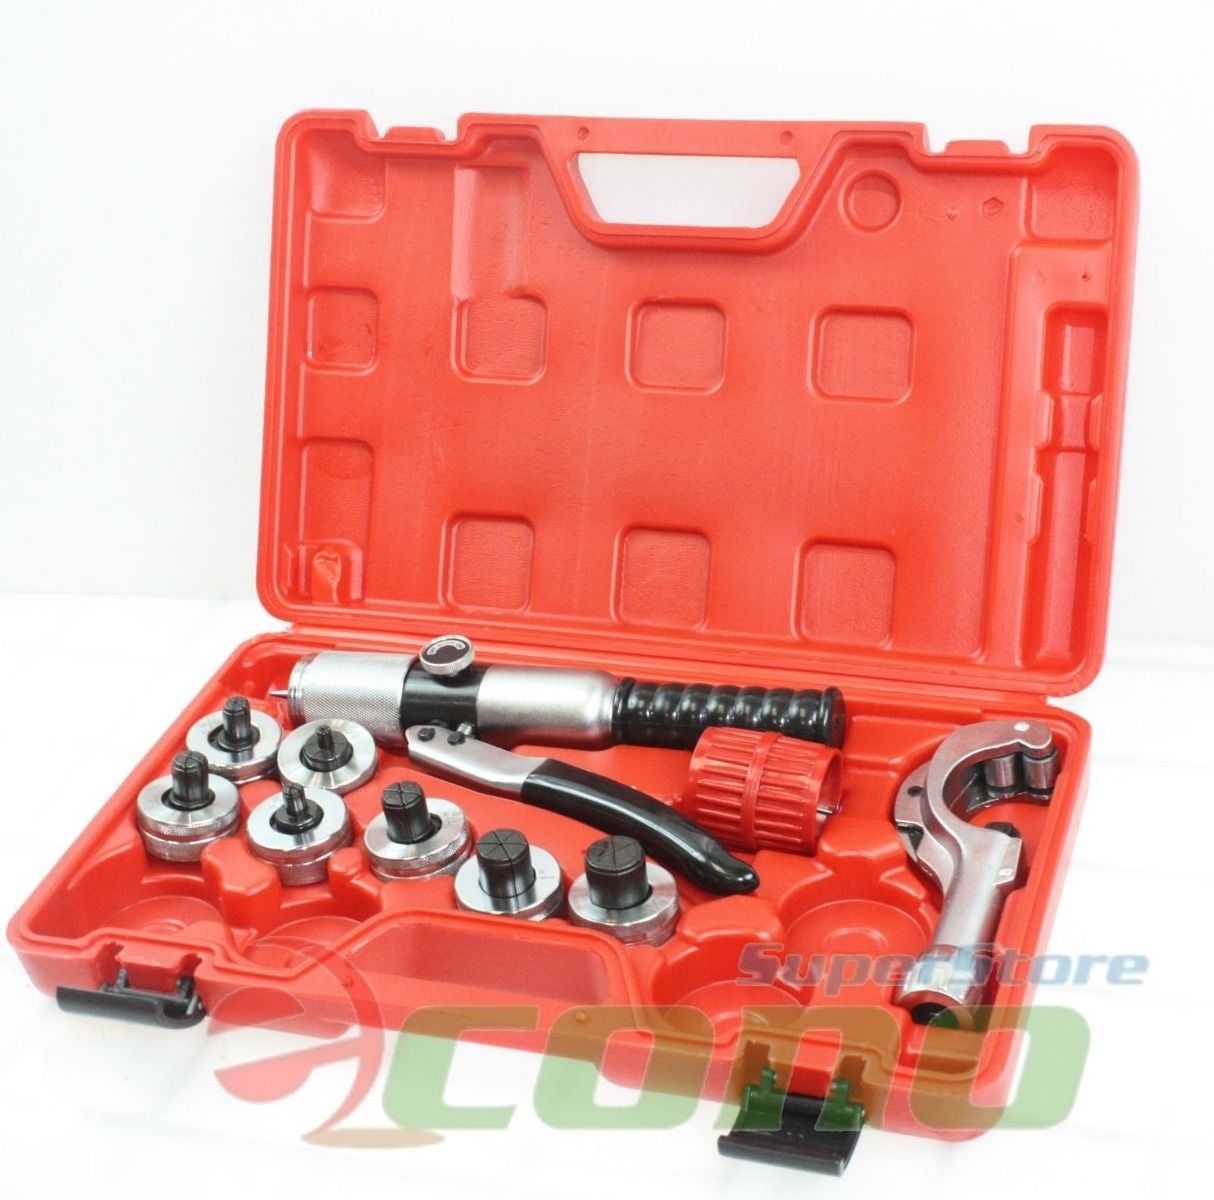 7 Lever Manual Pipe Flaring Expander Tool Hydraulic Copper Head Tube Swaging Kit 